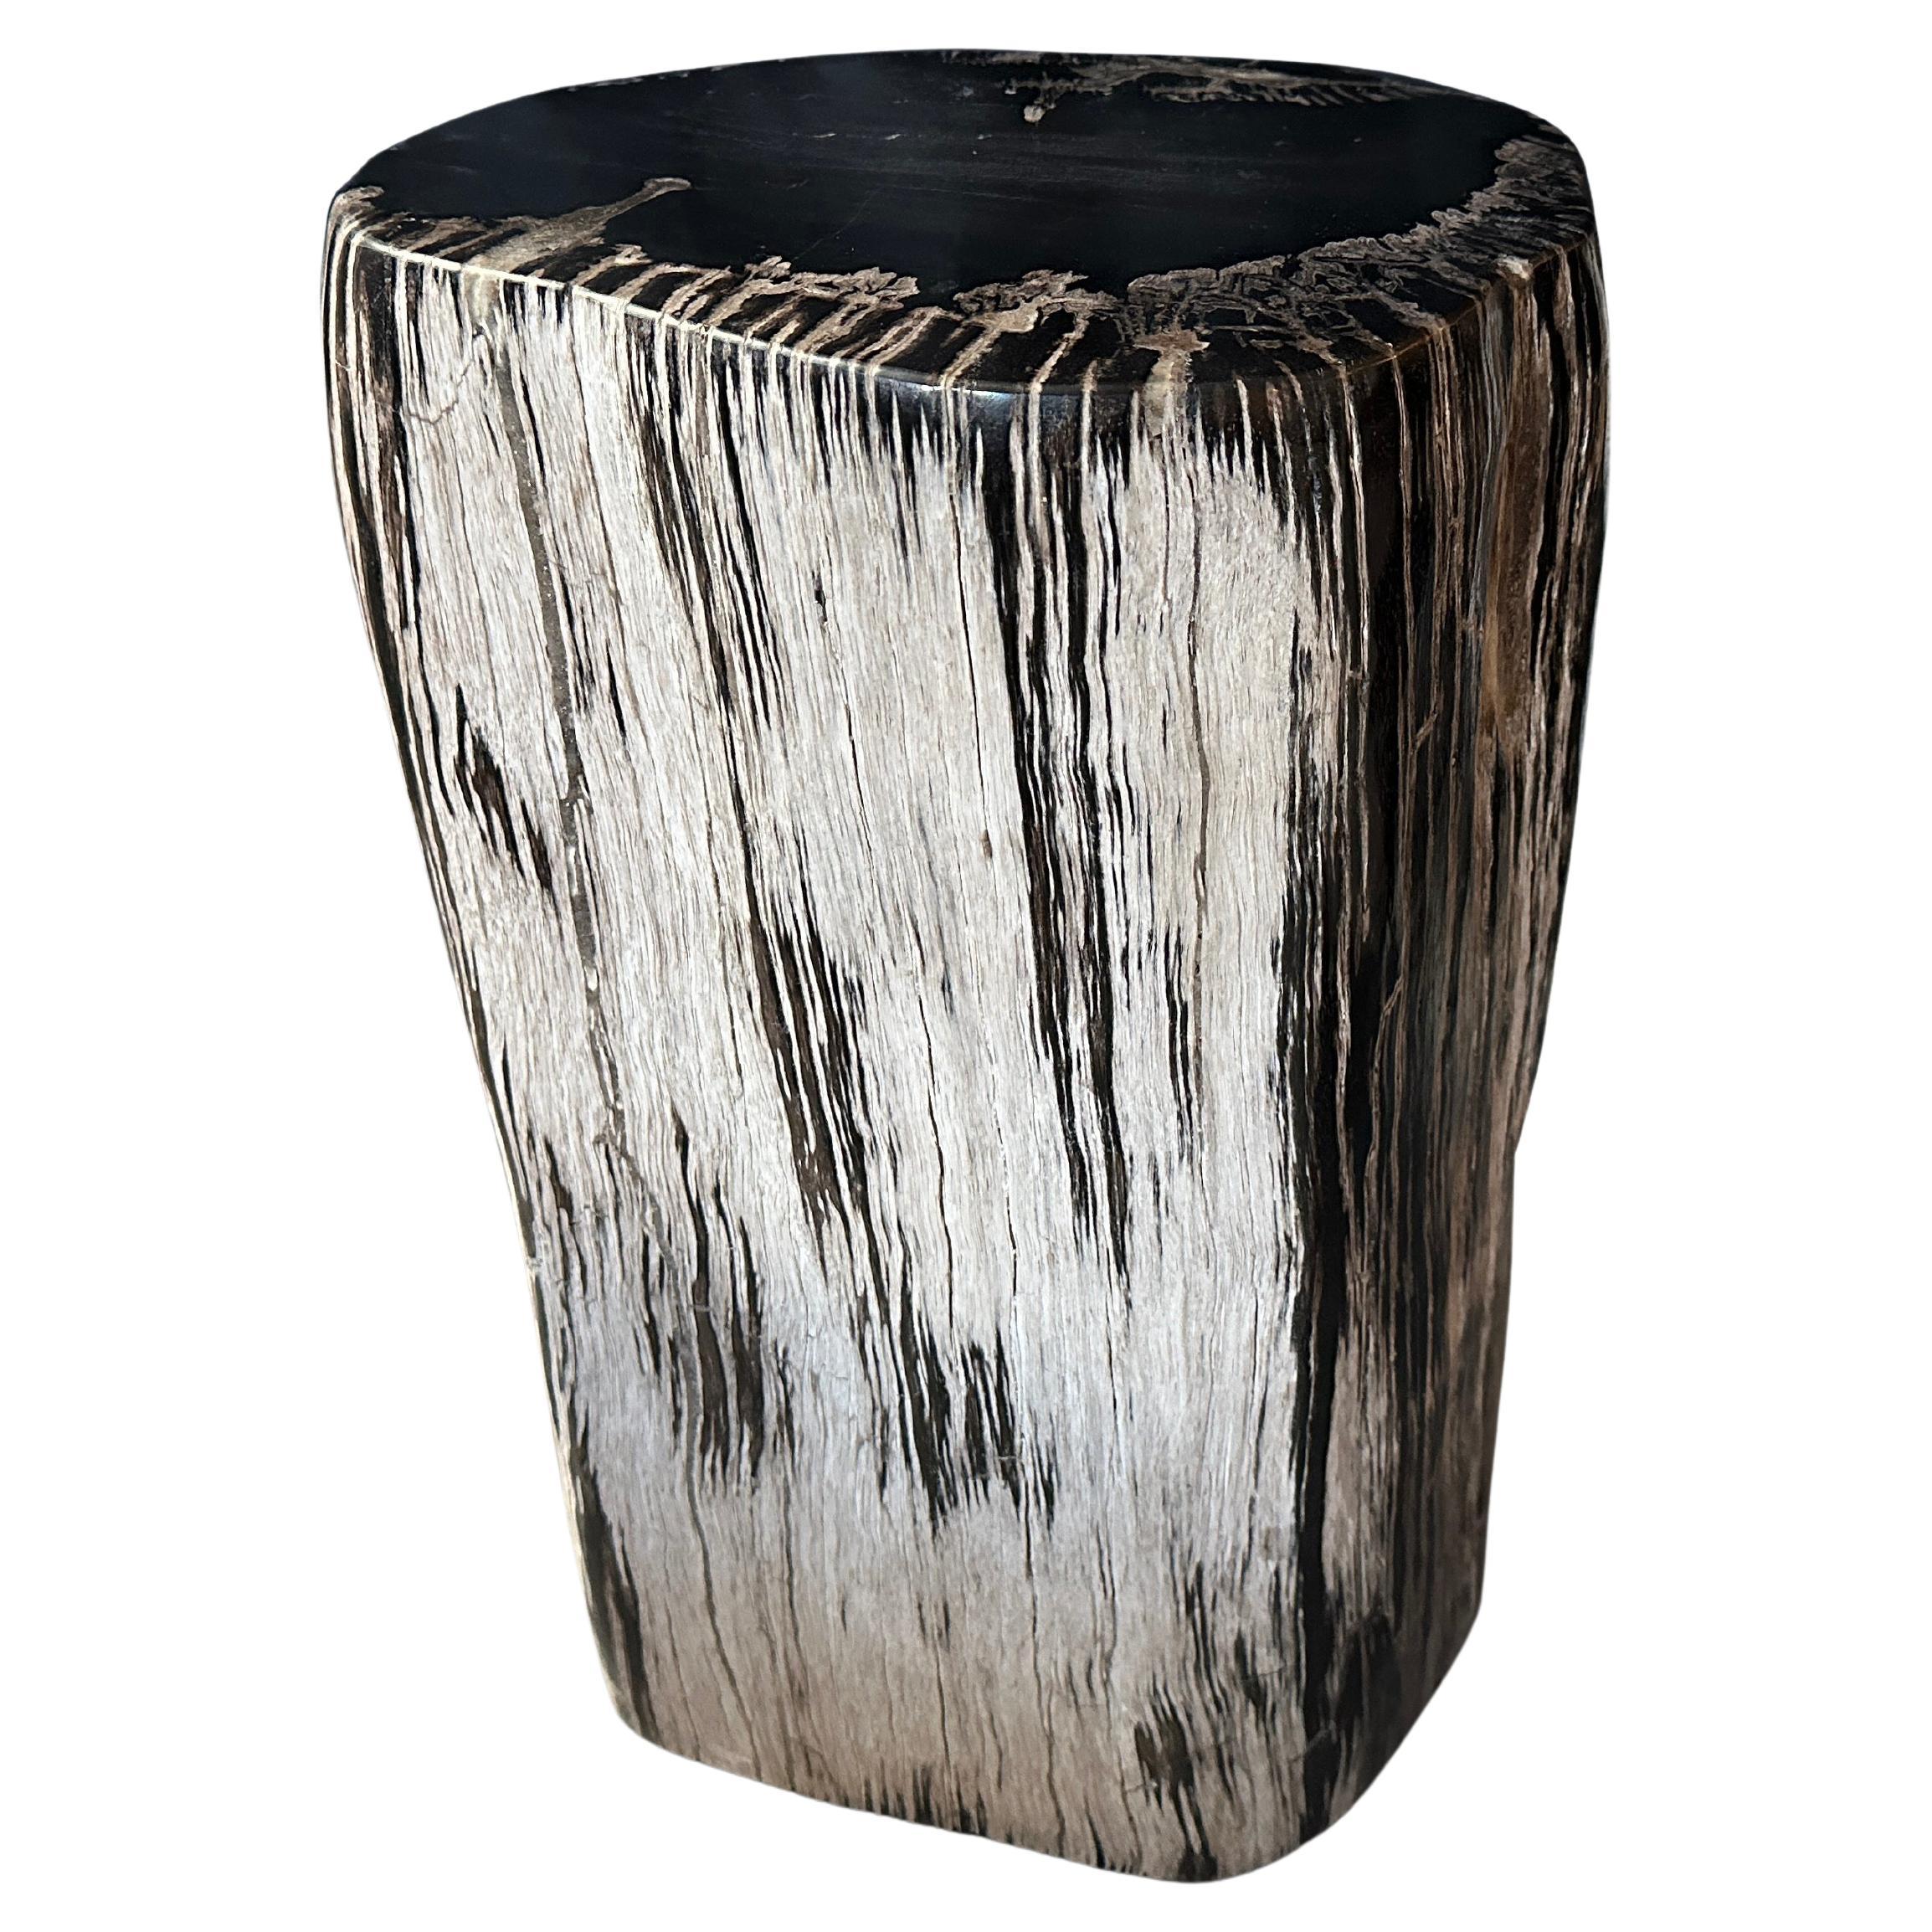 Andrianna Shamaris Black and White Petrified Wood Side Table or Pedestal For Sale